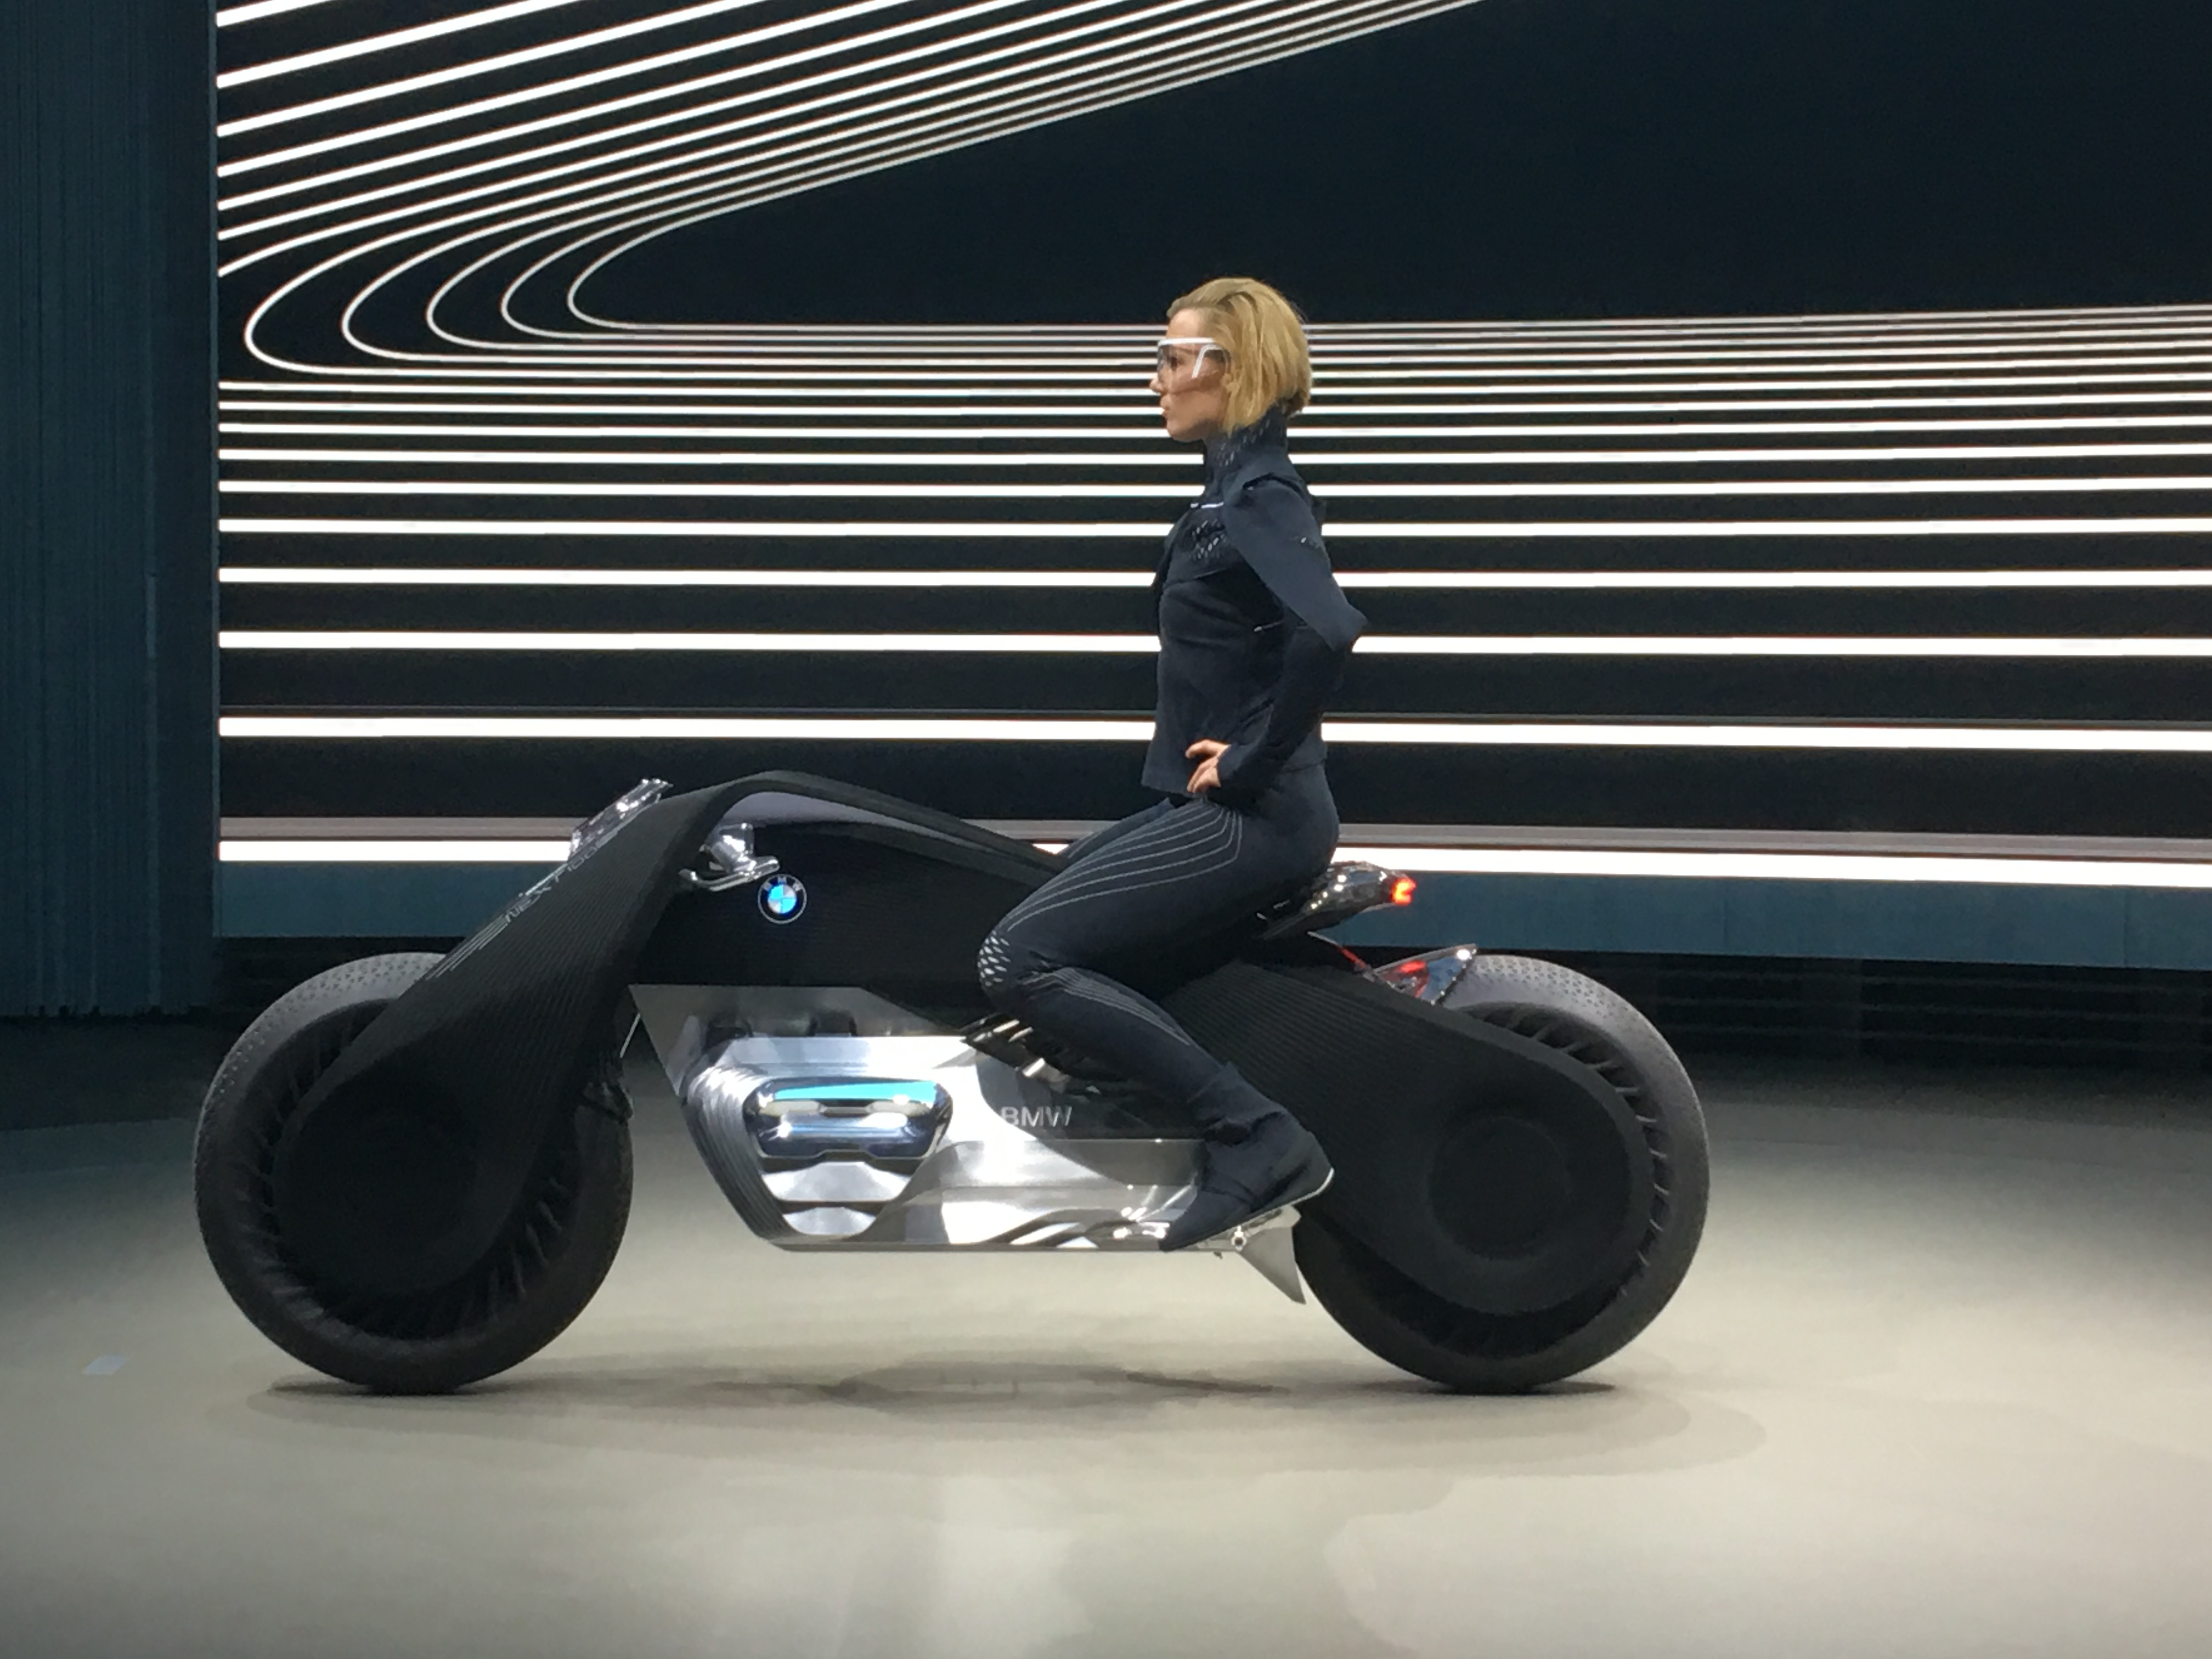 The BMW Motorrad Vision Next 100, the flexible motorcycle of the